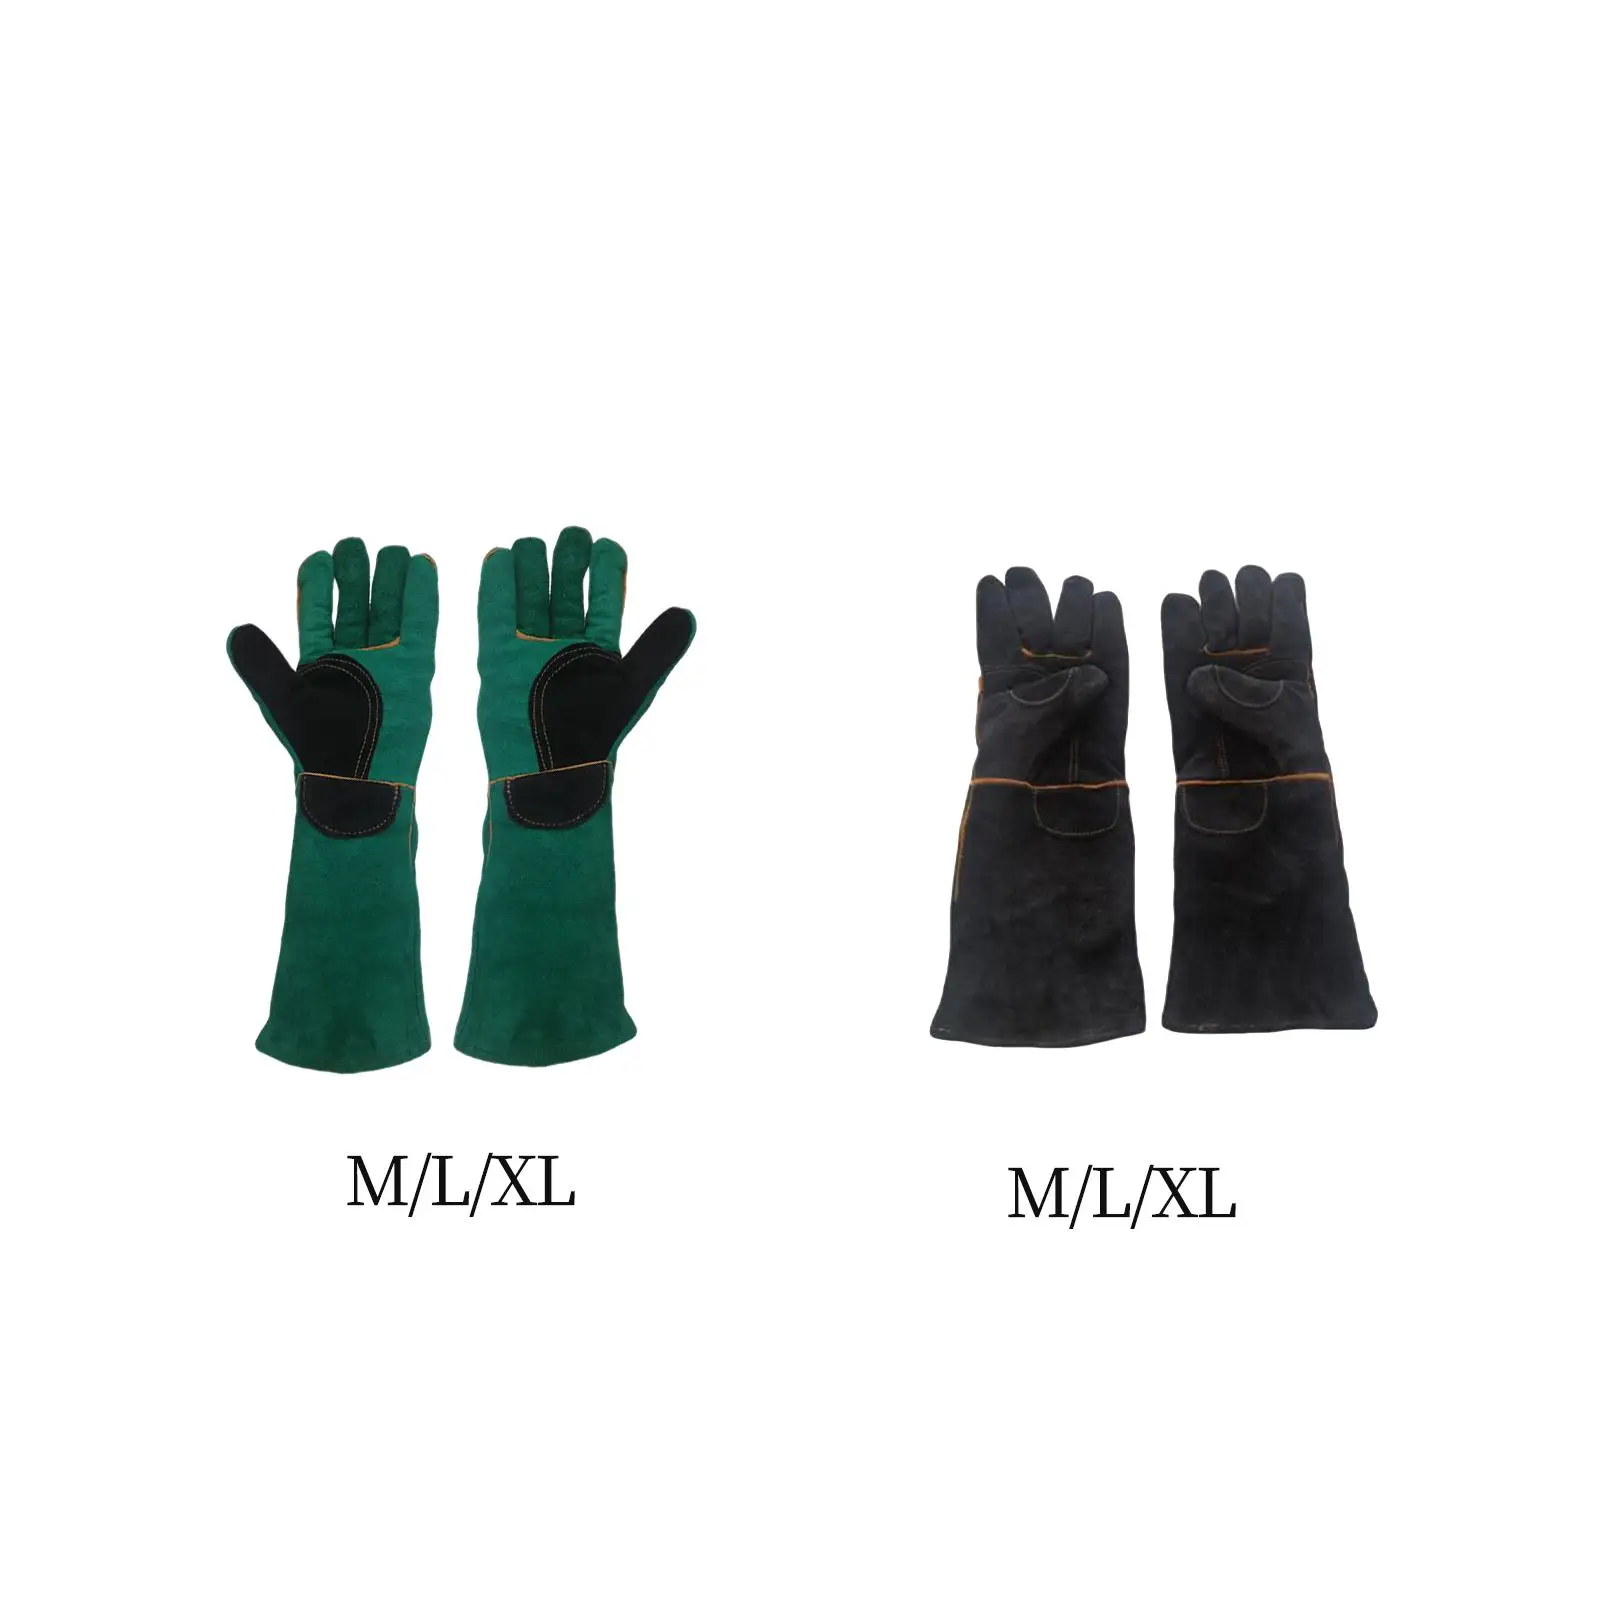 43cm Animal Handling Gloves Pet Reinforced Leather Training Anti Scratch Bite Resistant Protective for Zoo Worker Cat Dogs